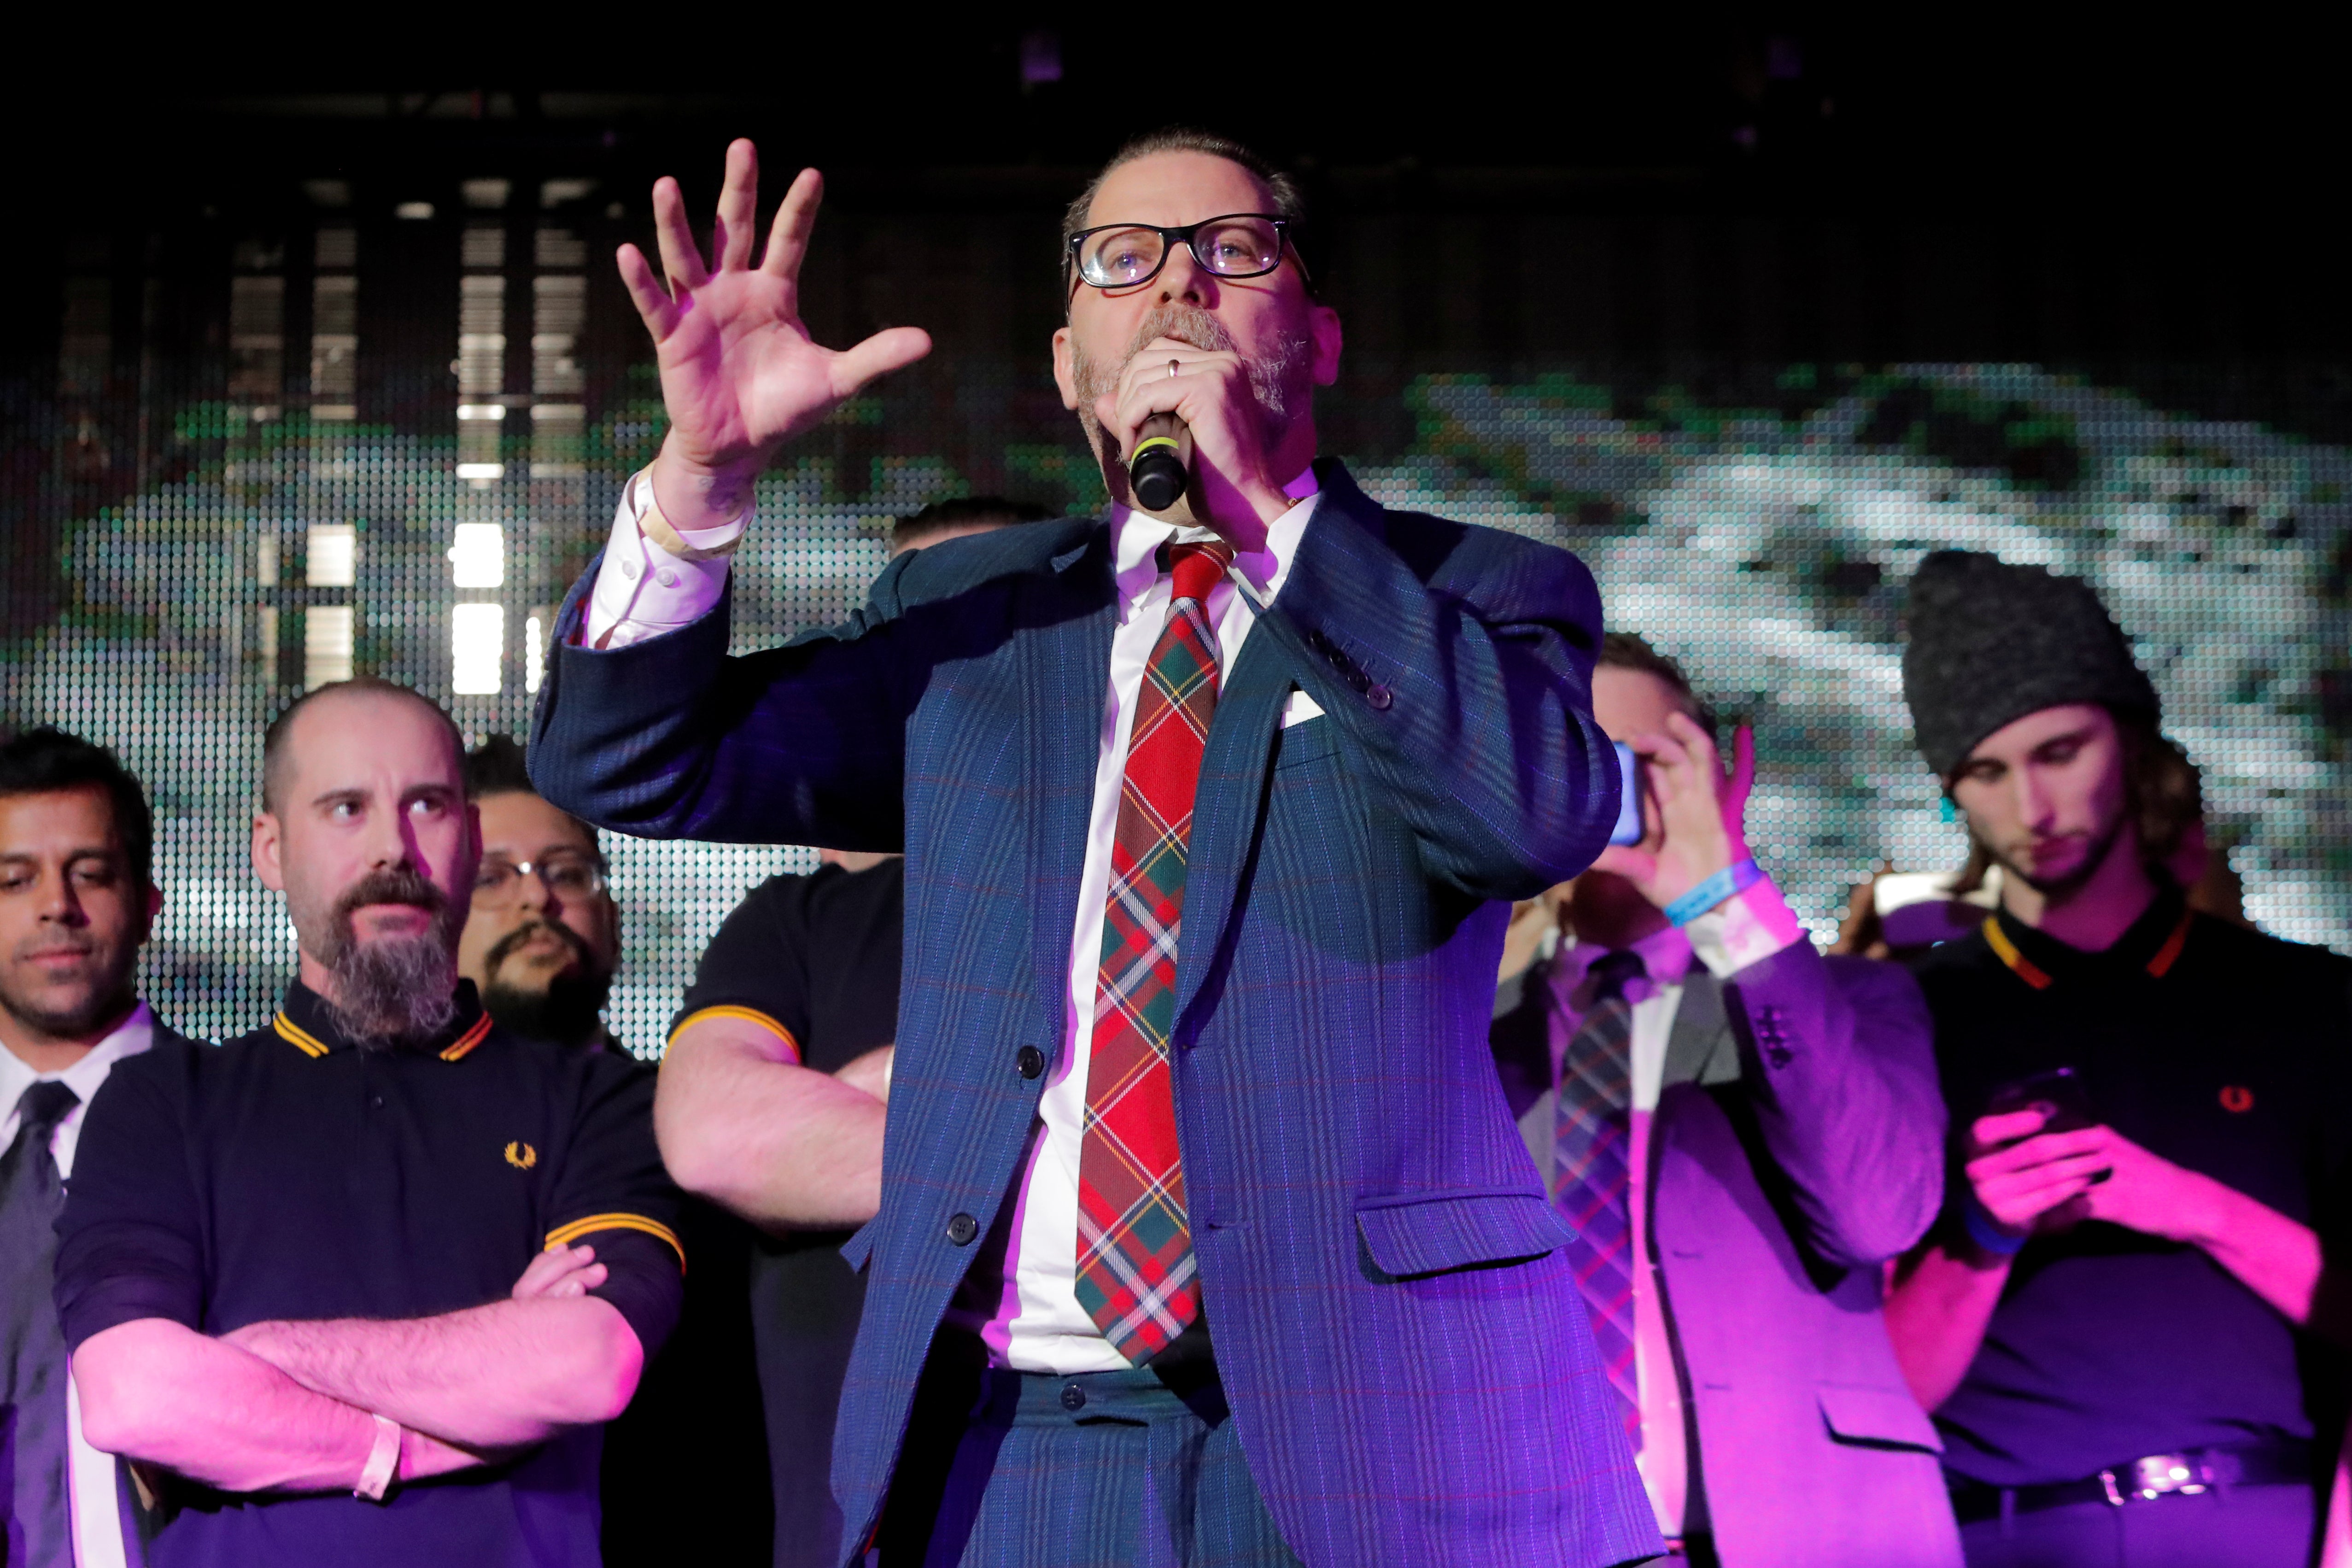 Vice magazine co-founder Gavin McInnes speaks on stage with members of the Proud Boys organization at the "A Night for Freedom" event organized by Mike Cernovich in Manhattan on January 20, 2018. 